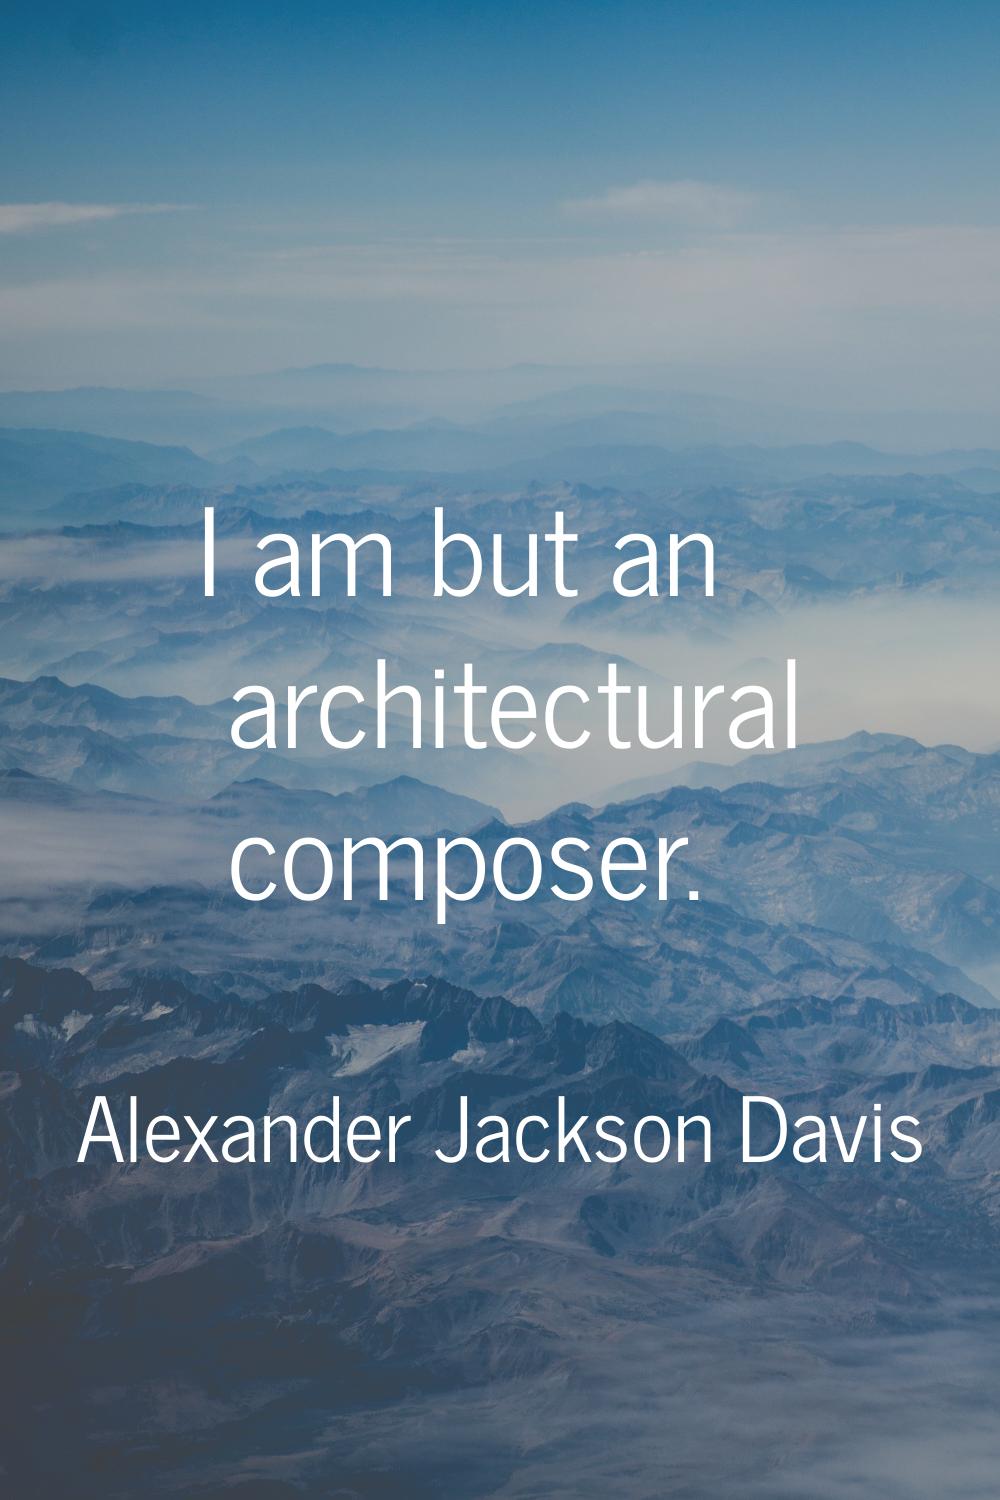 I am but an architectural composer.